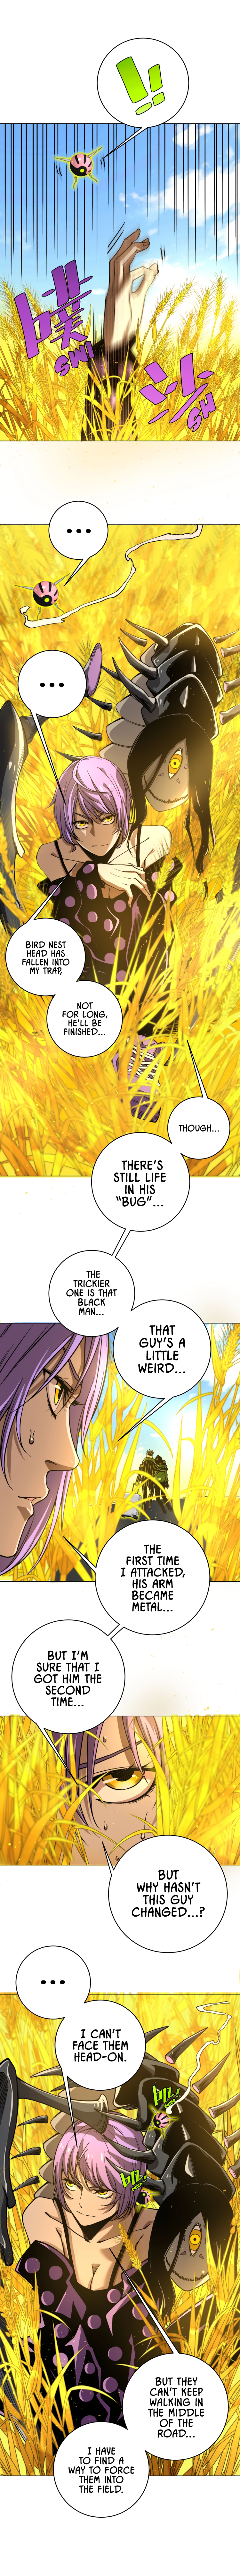 Dead Bug Parasitism Ch. 5 A Difficult Choice Between Two